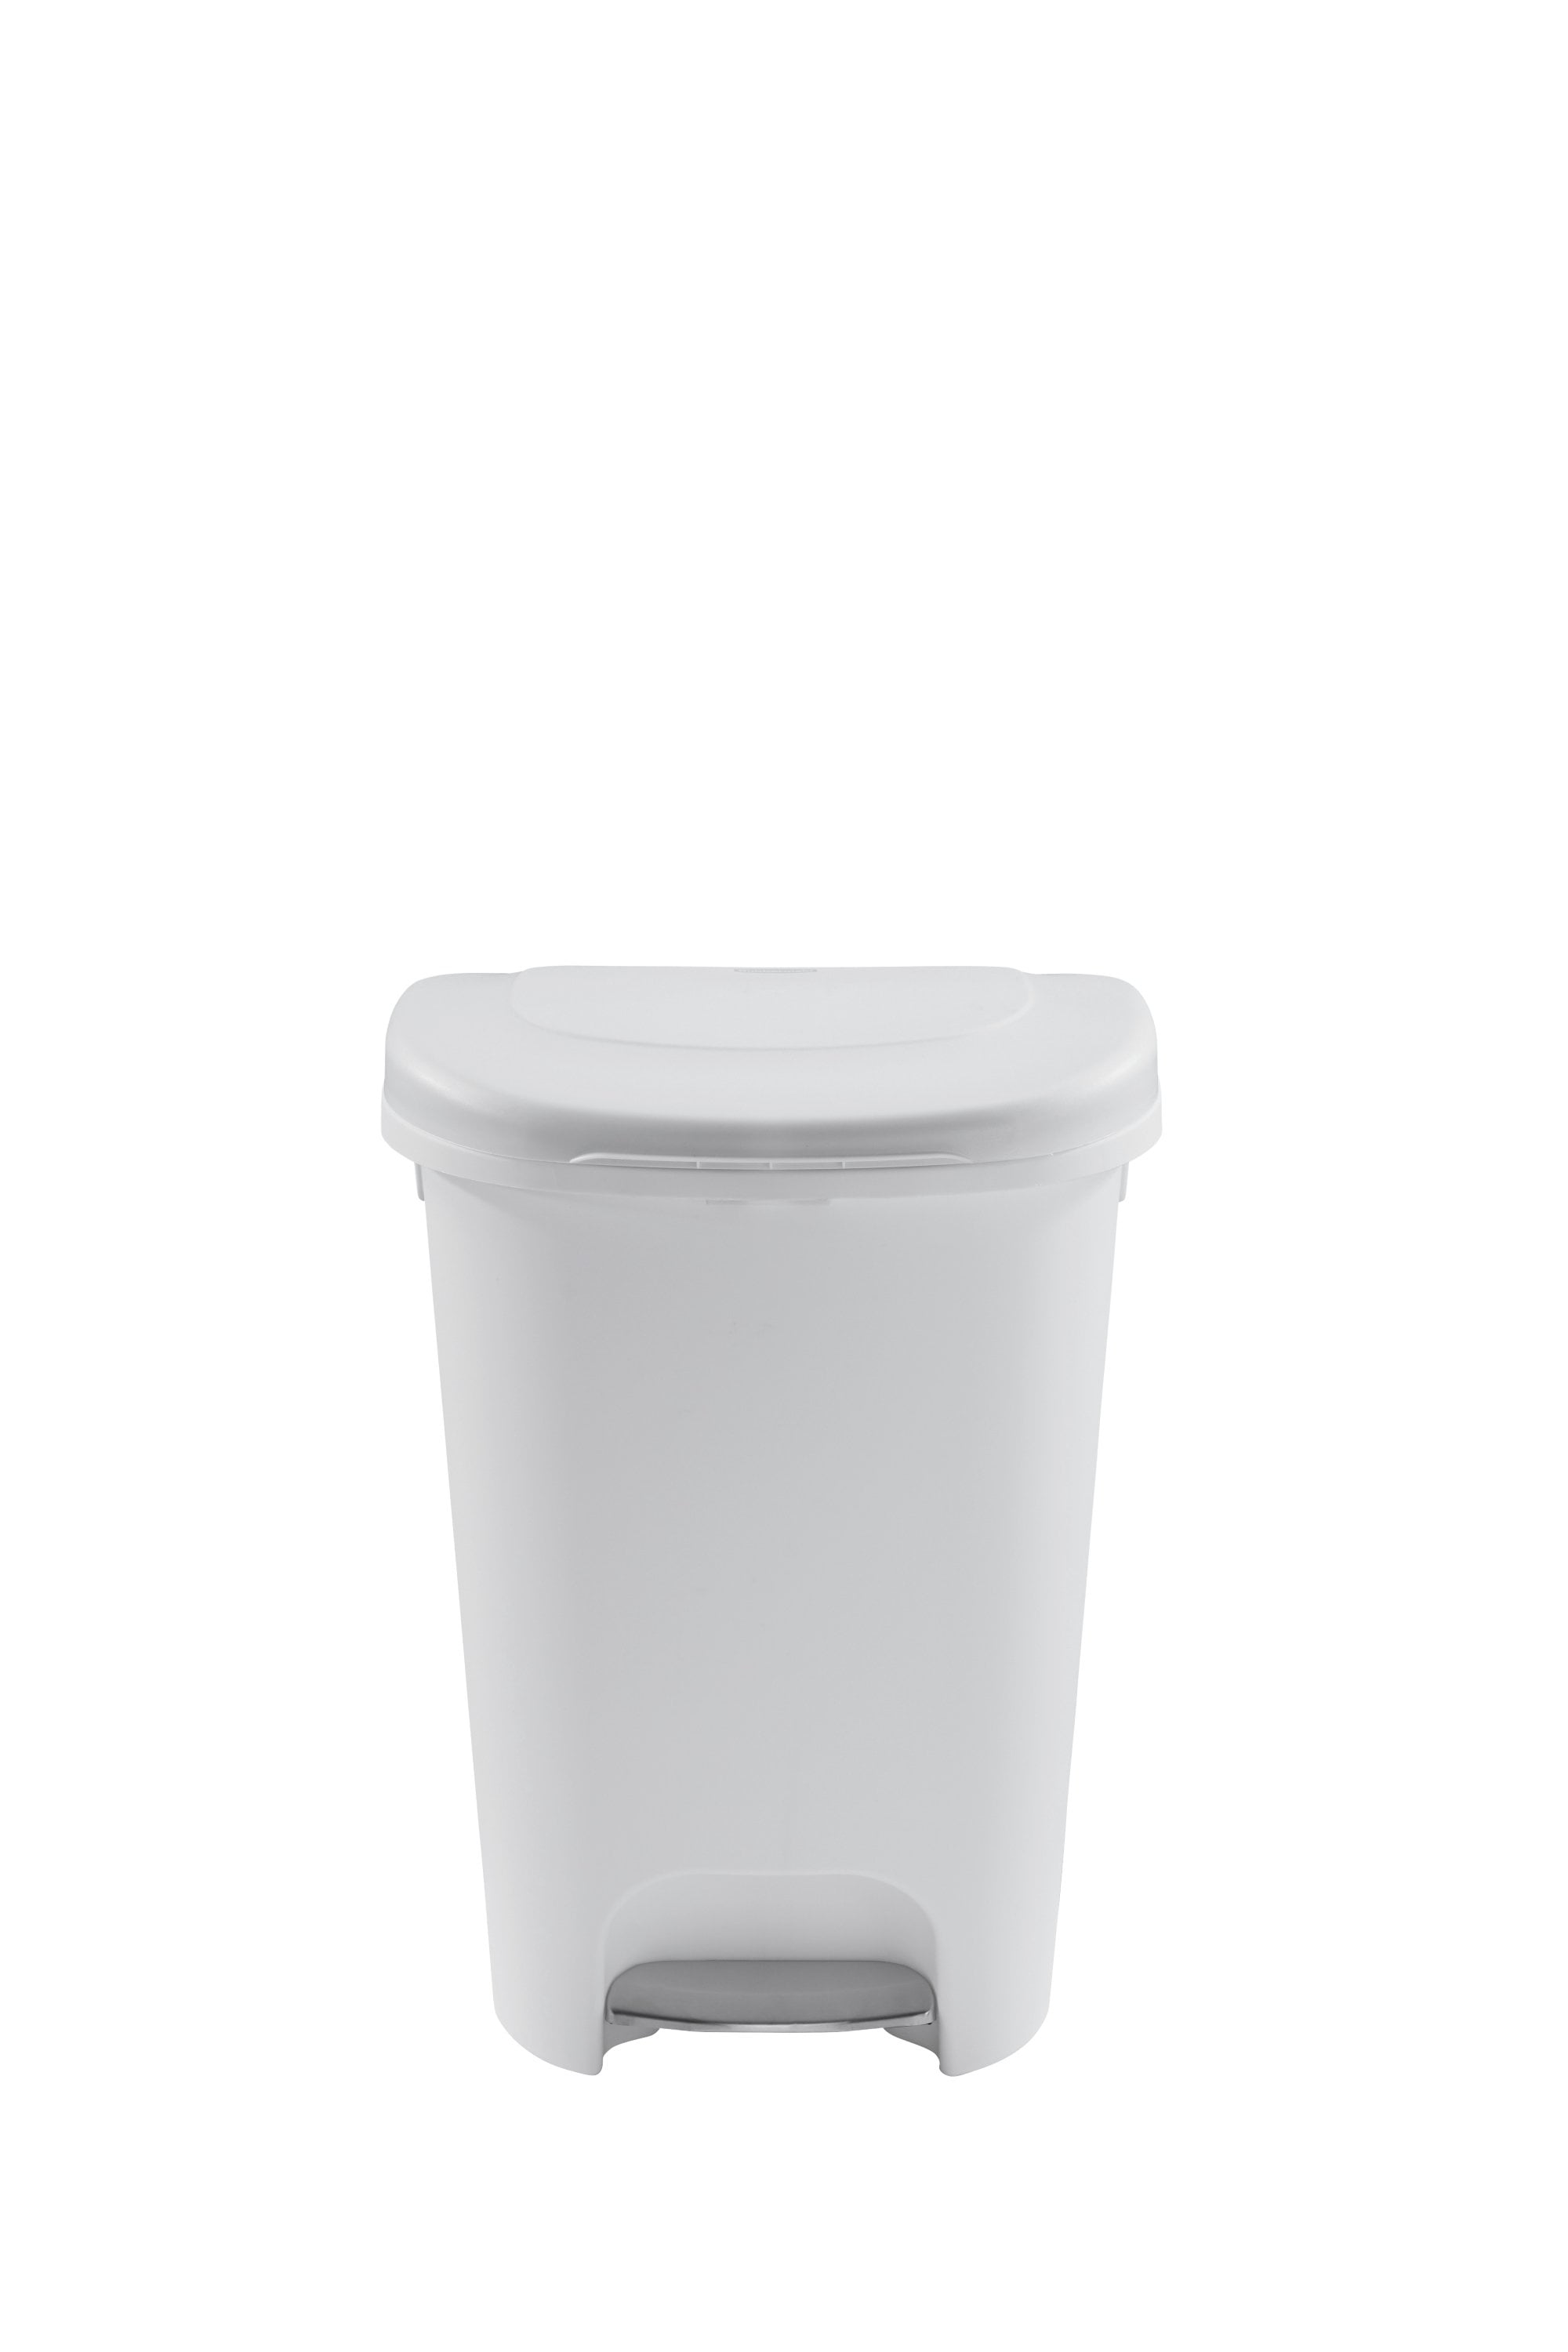 Rubbermaid 6020896 13 gal Premium Gray Step-On Trash Can - Pack of